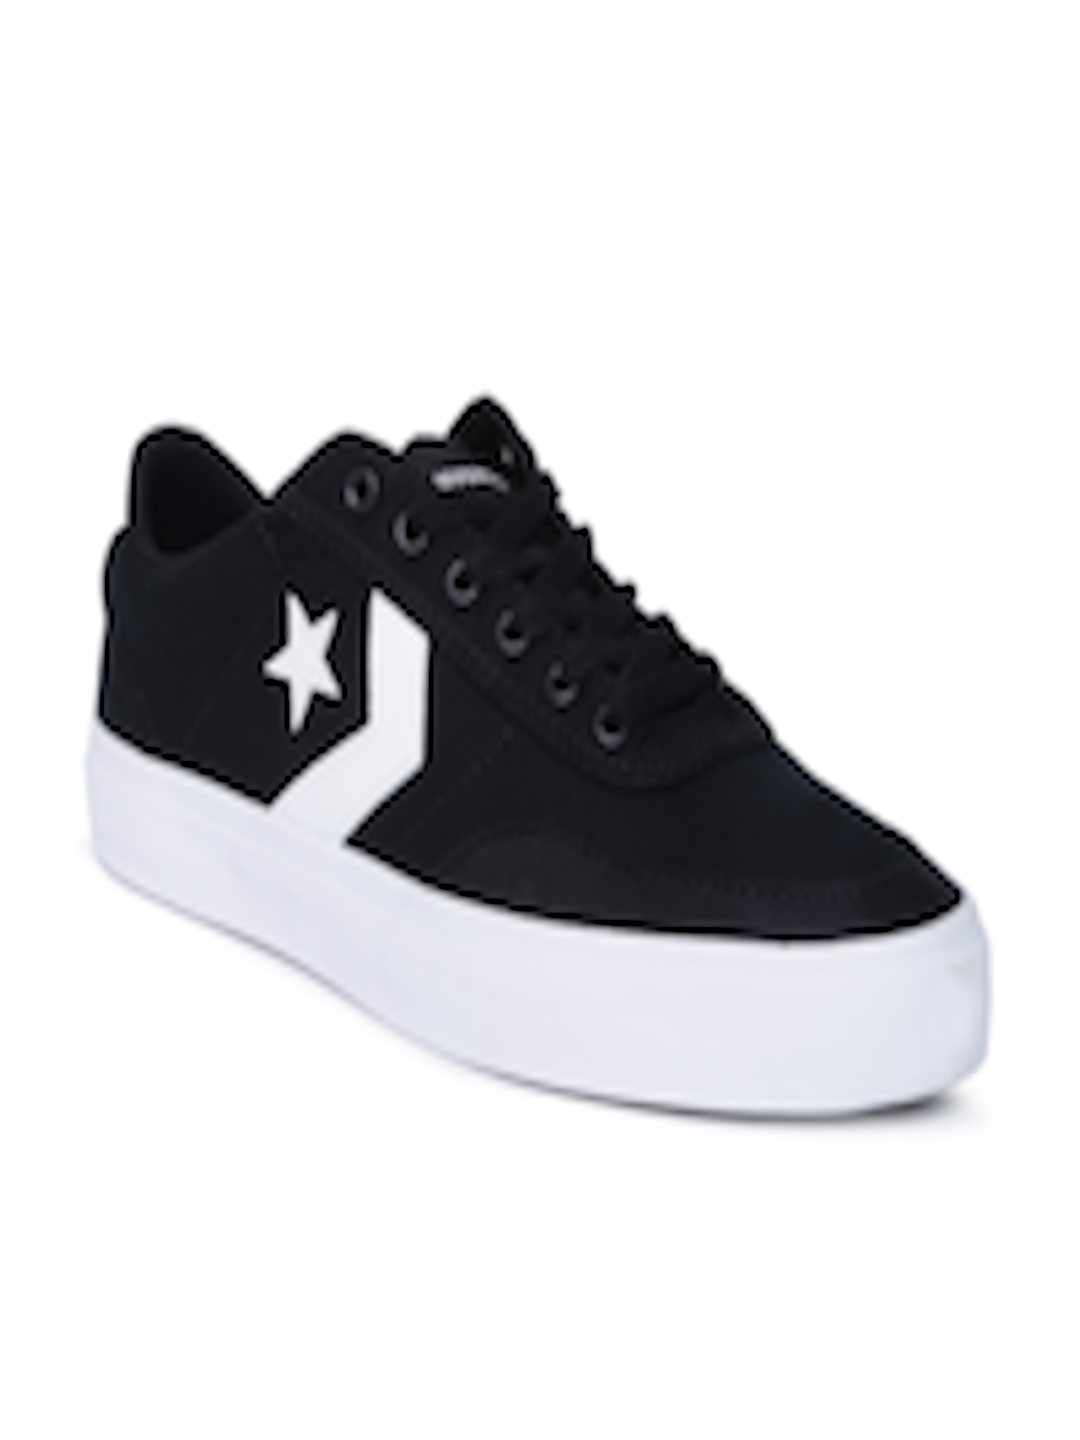 Buy Converse Unisex Black Solid Sneakers - Casual Shoes for Unisex